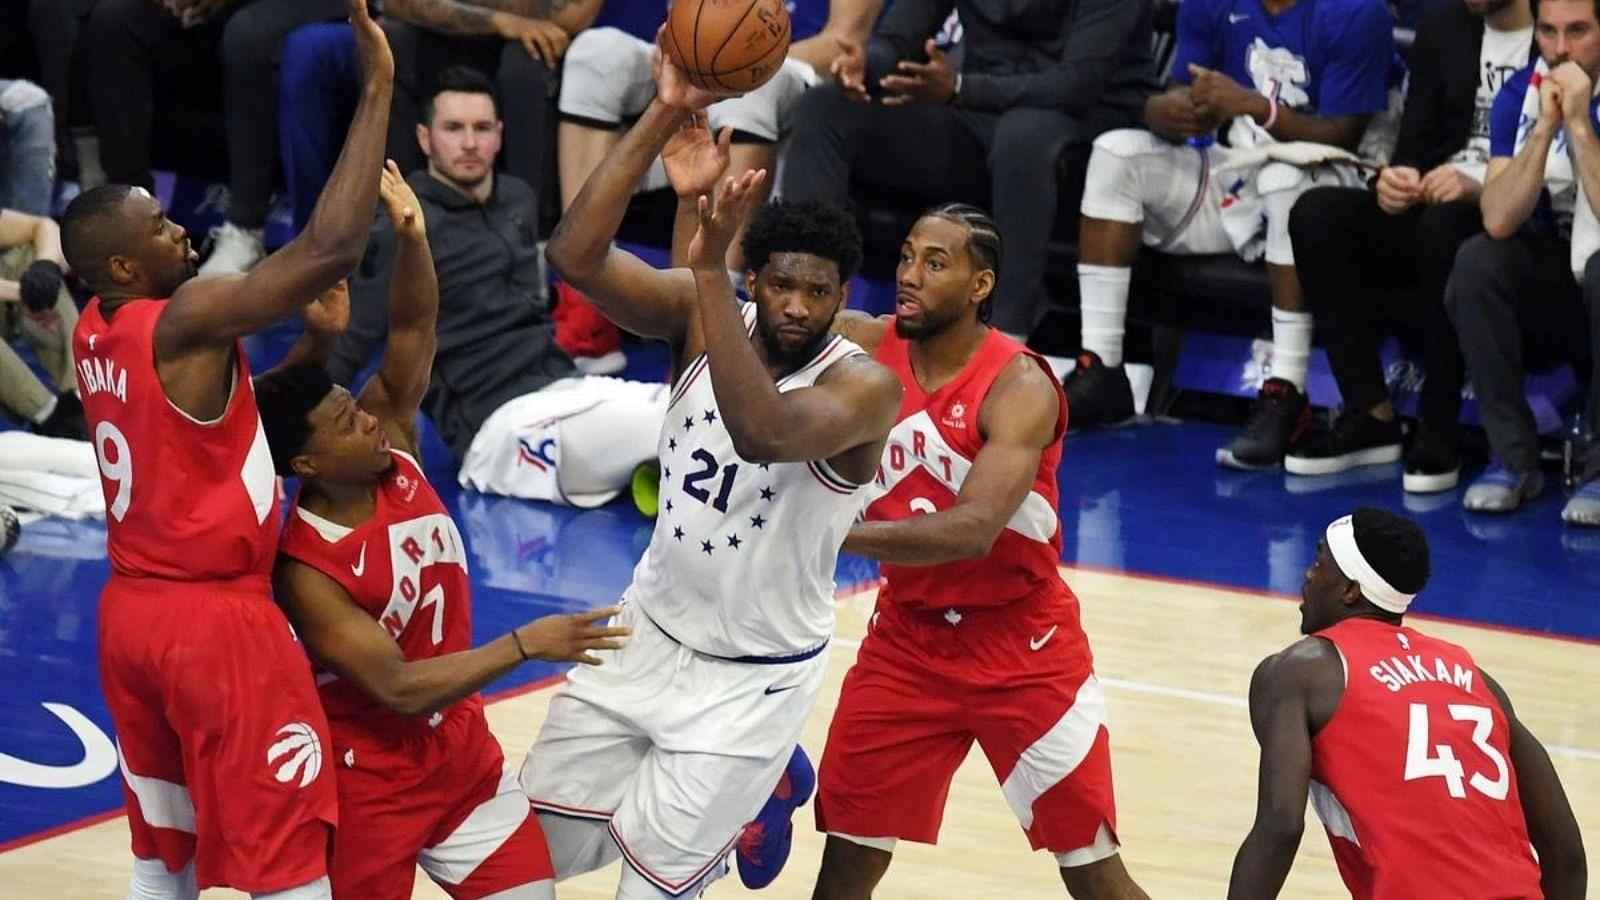 "Toronto Raptors just play reckless, sending three guys on me.." Joel Embiid knows how his first round opponents play, not going to repeat the heartbreak of 2019